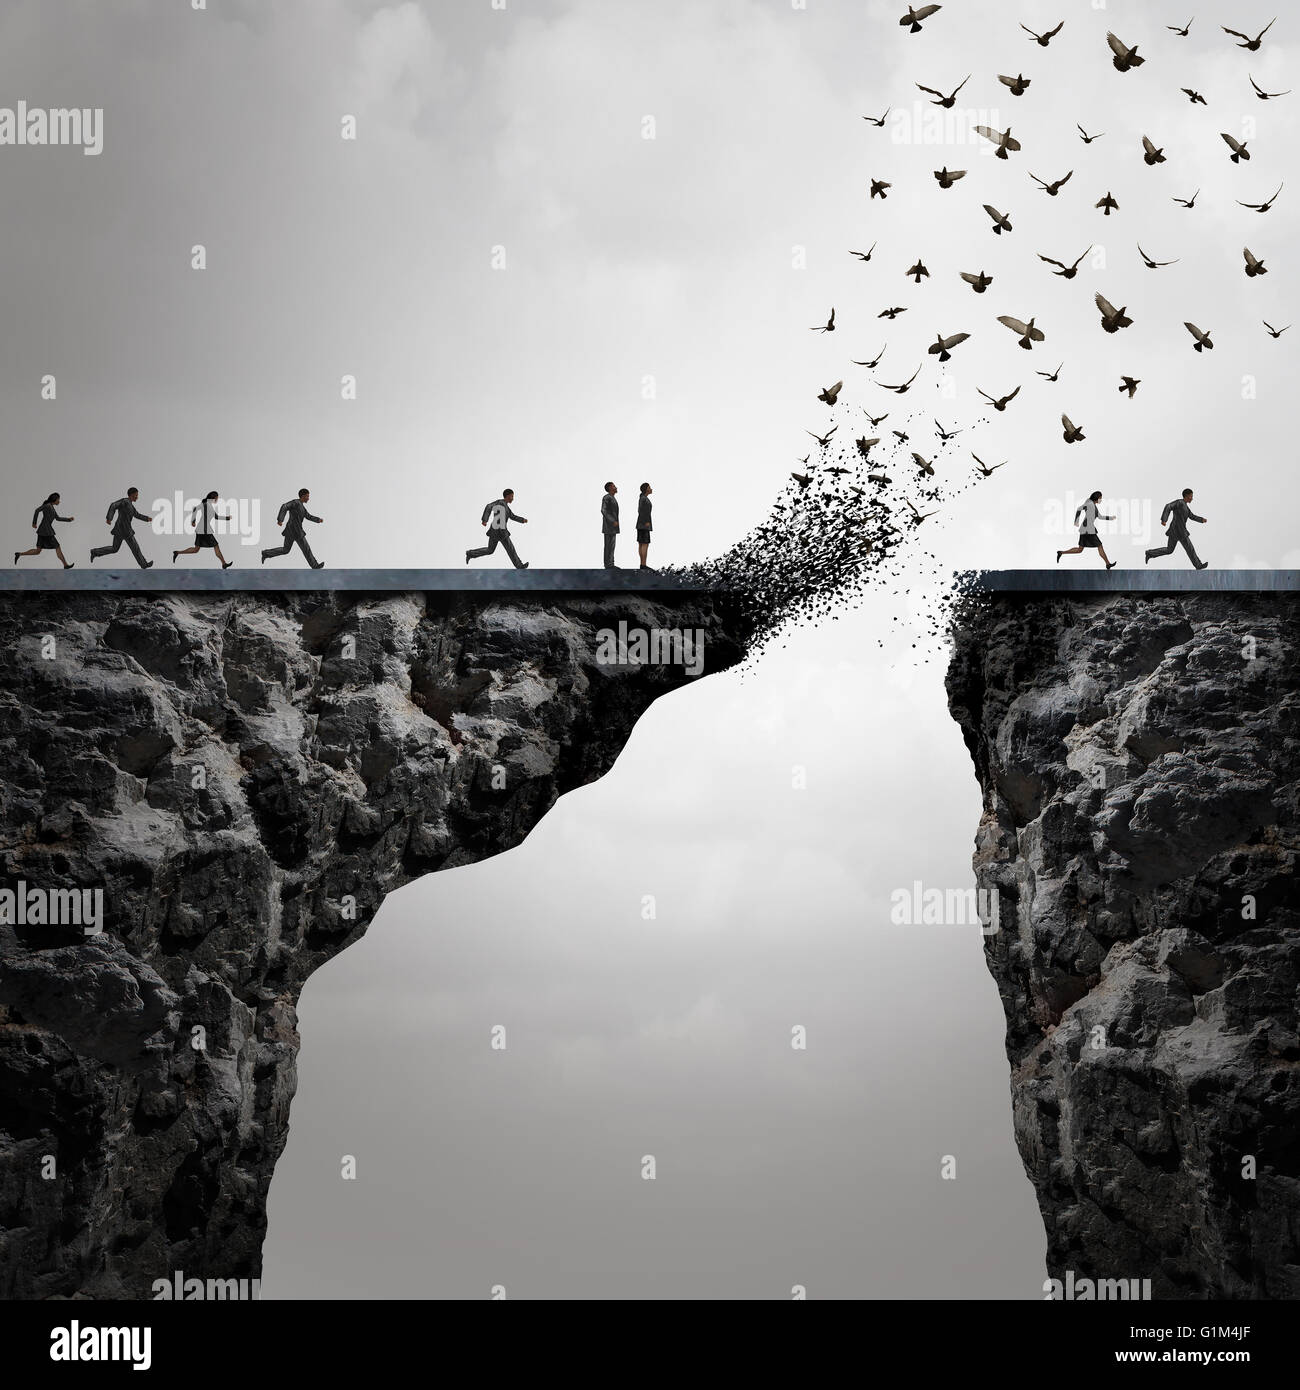 Lost opportunities concept as a too late metaphor with businesspeople running to cross a bridge in time but the link is broken by the mountain flying away in the shape of birds in a 3D illustration style. Stock Photo